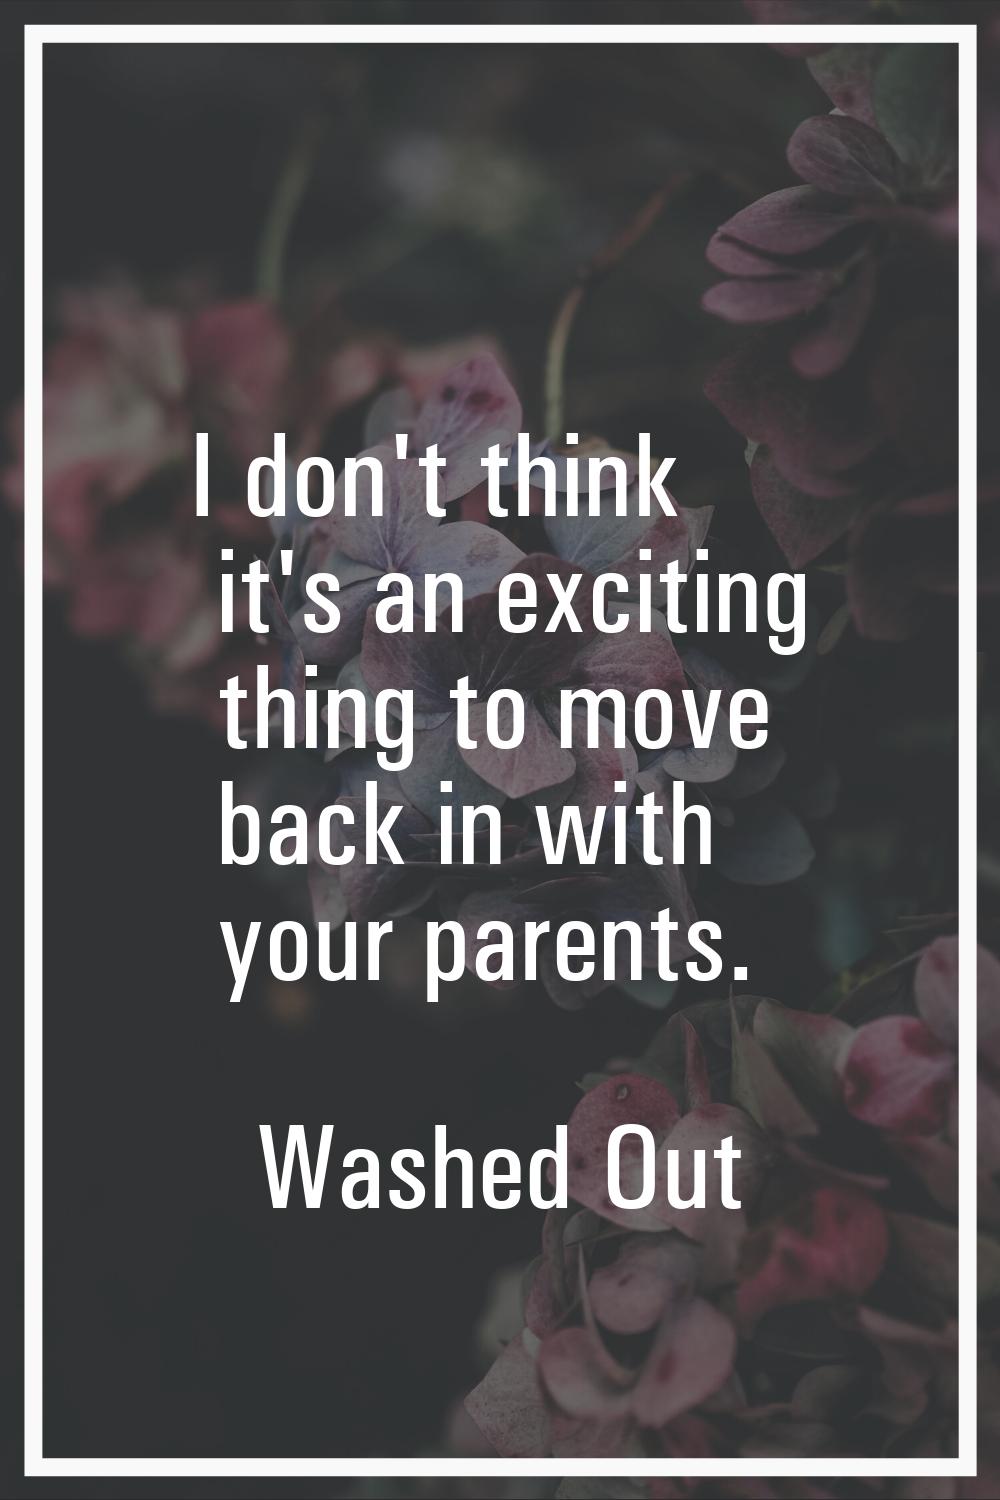 I don't think it's an exciting thing to move back in with your parents.